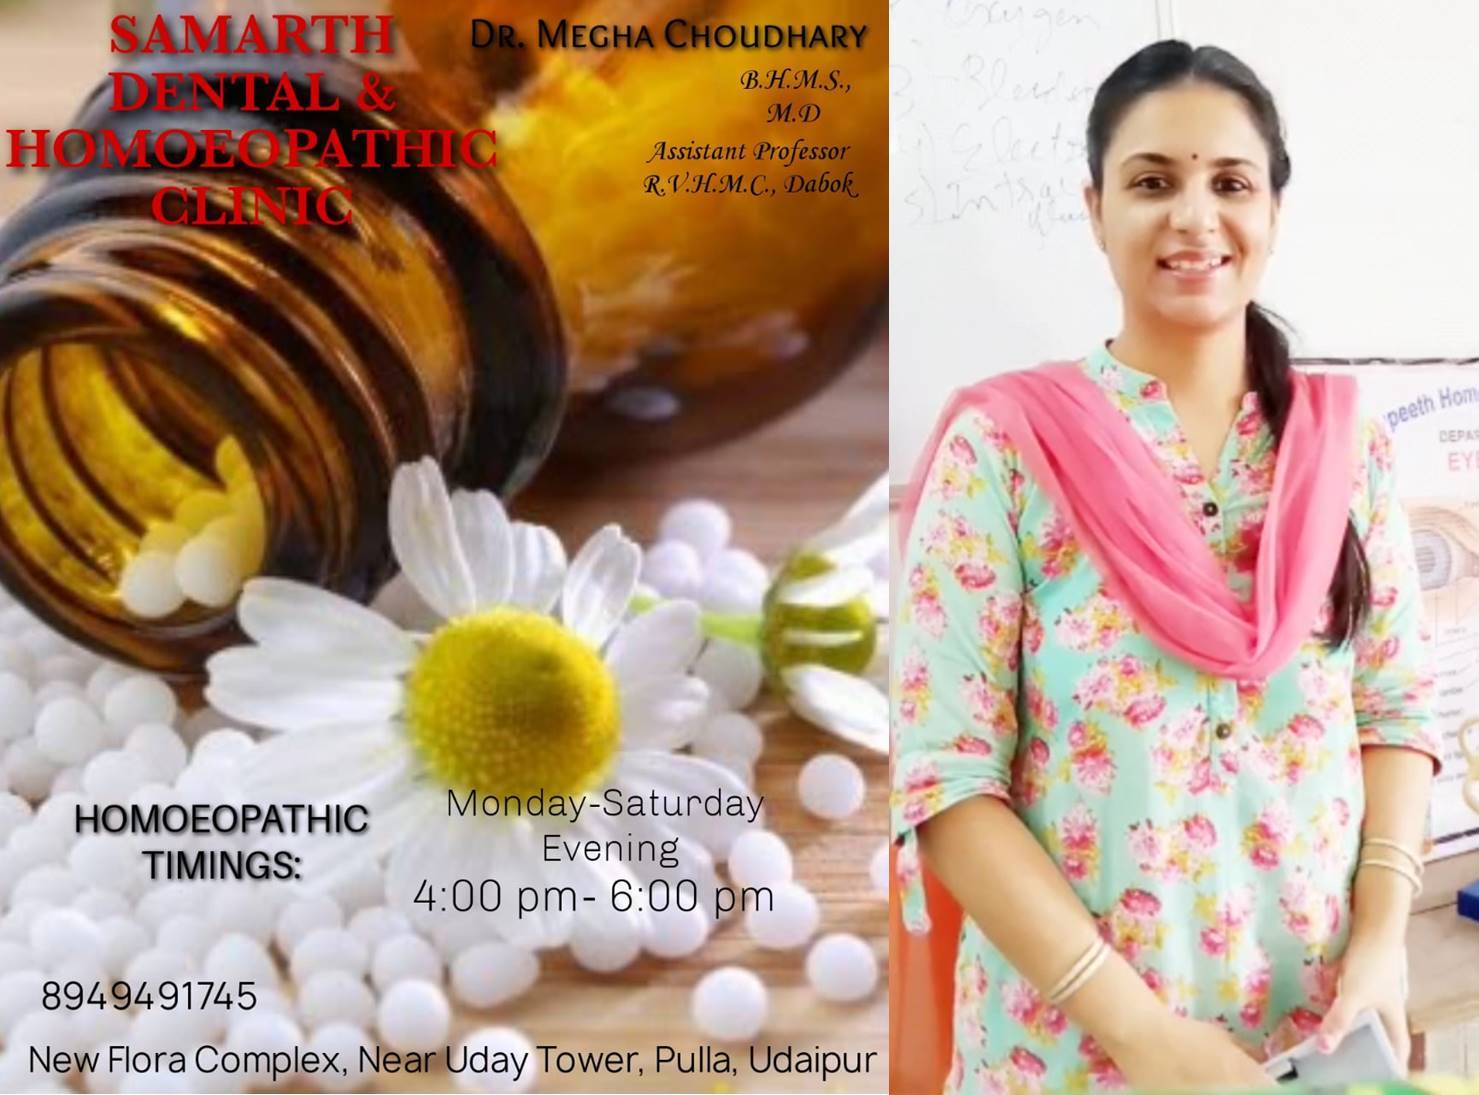 Free Check up and Treatment services by Samarth Homoeopathic for Breast Cancer and Female conditions